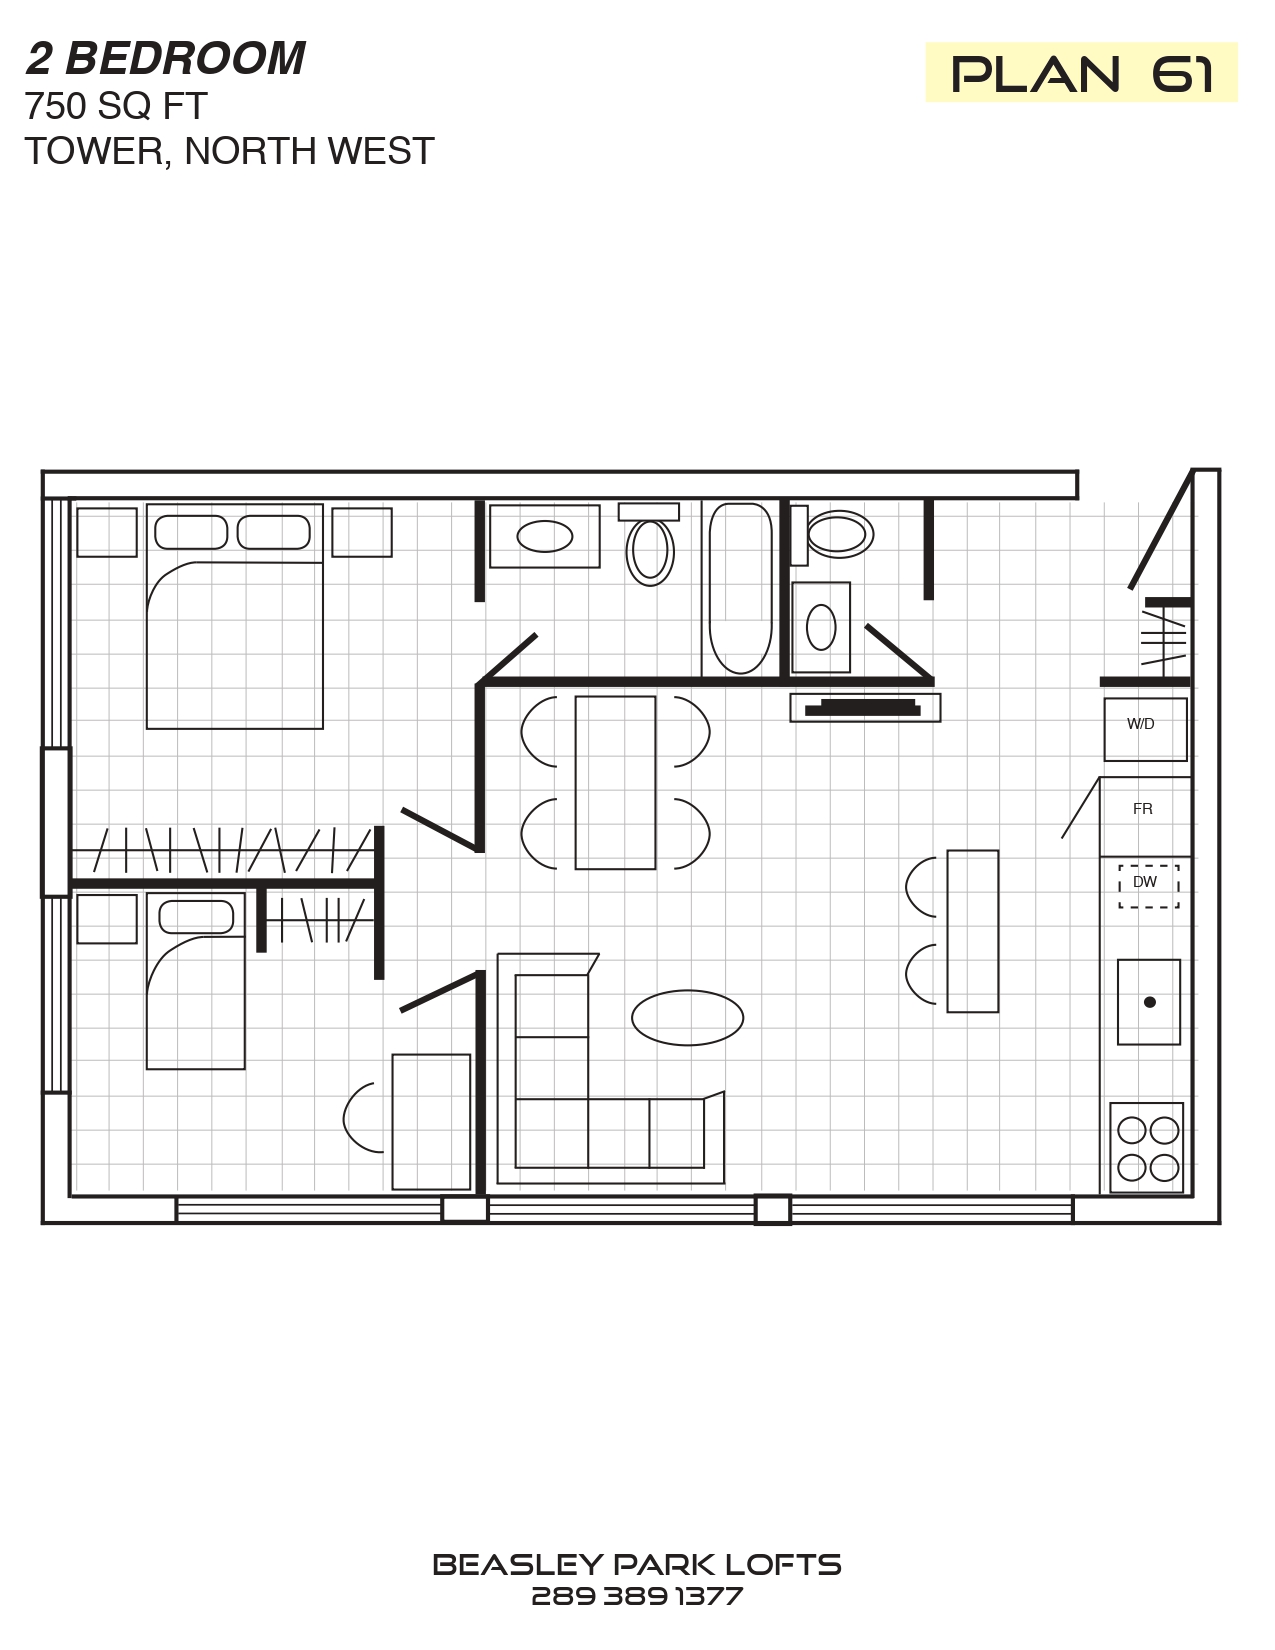 Beasley Park Lofts Plan 61 Floor Plans and Pricing